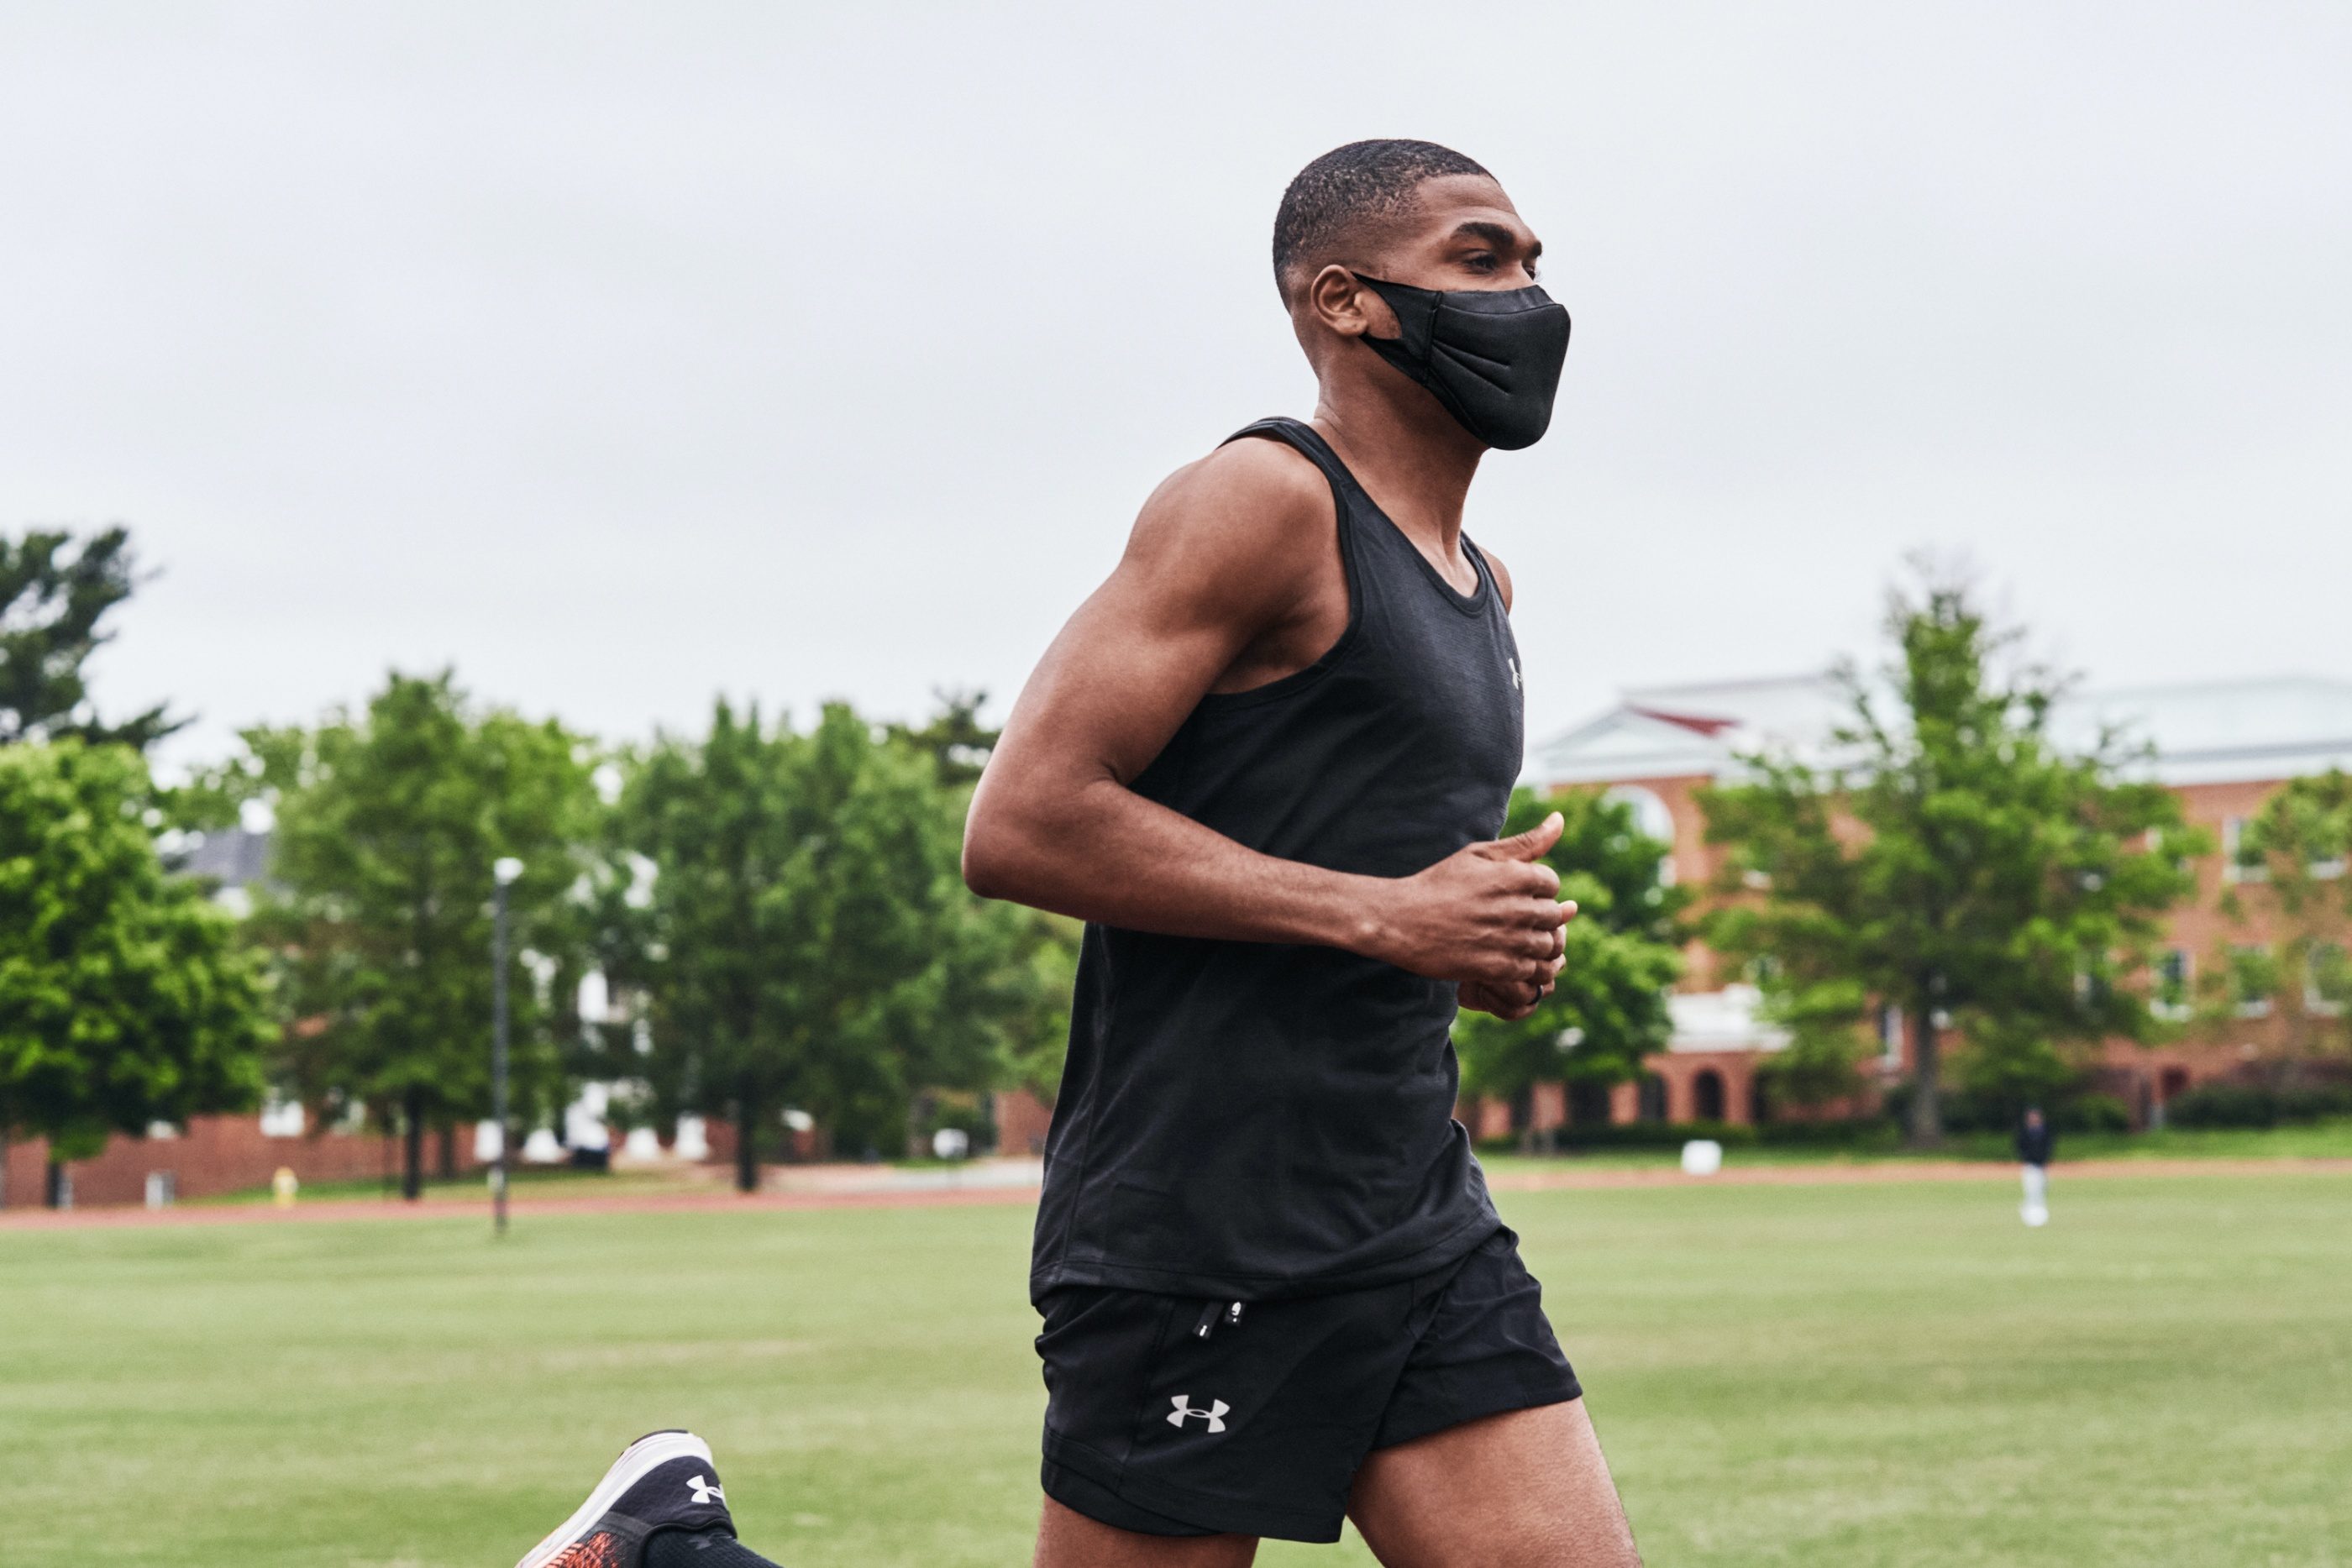 First impressions: Using the Under Armour sports mask